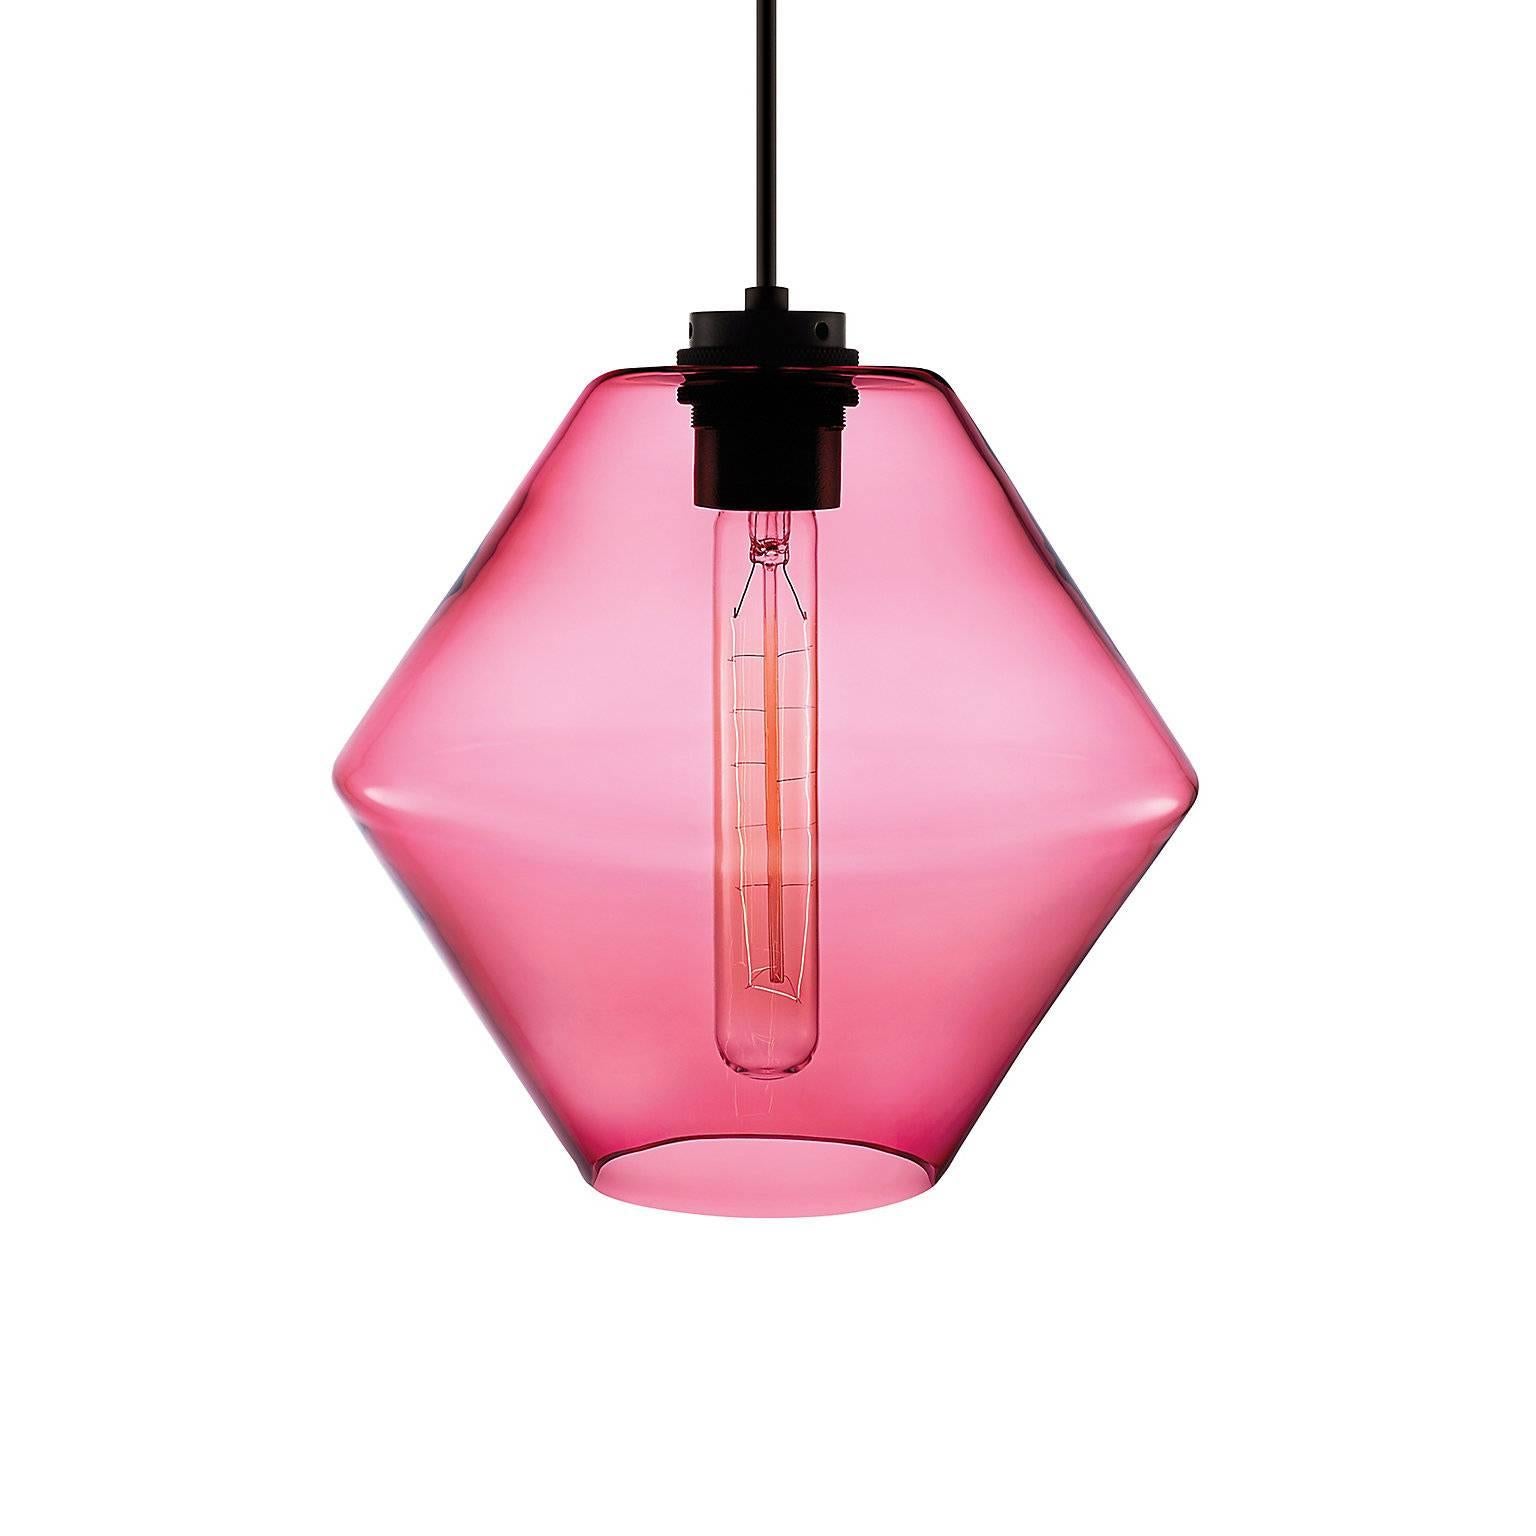 Trove Crystal Handblown Modern Glass Pendant Light, Made in the USA In New Condition For Sale In Beacon, NY